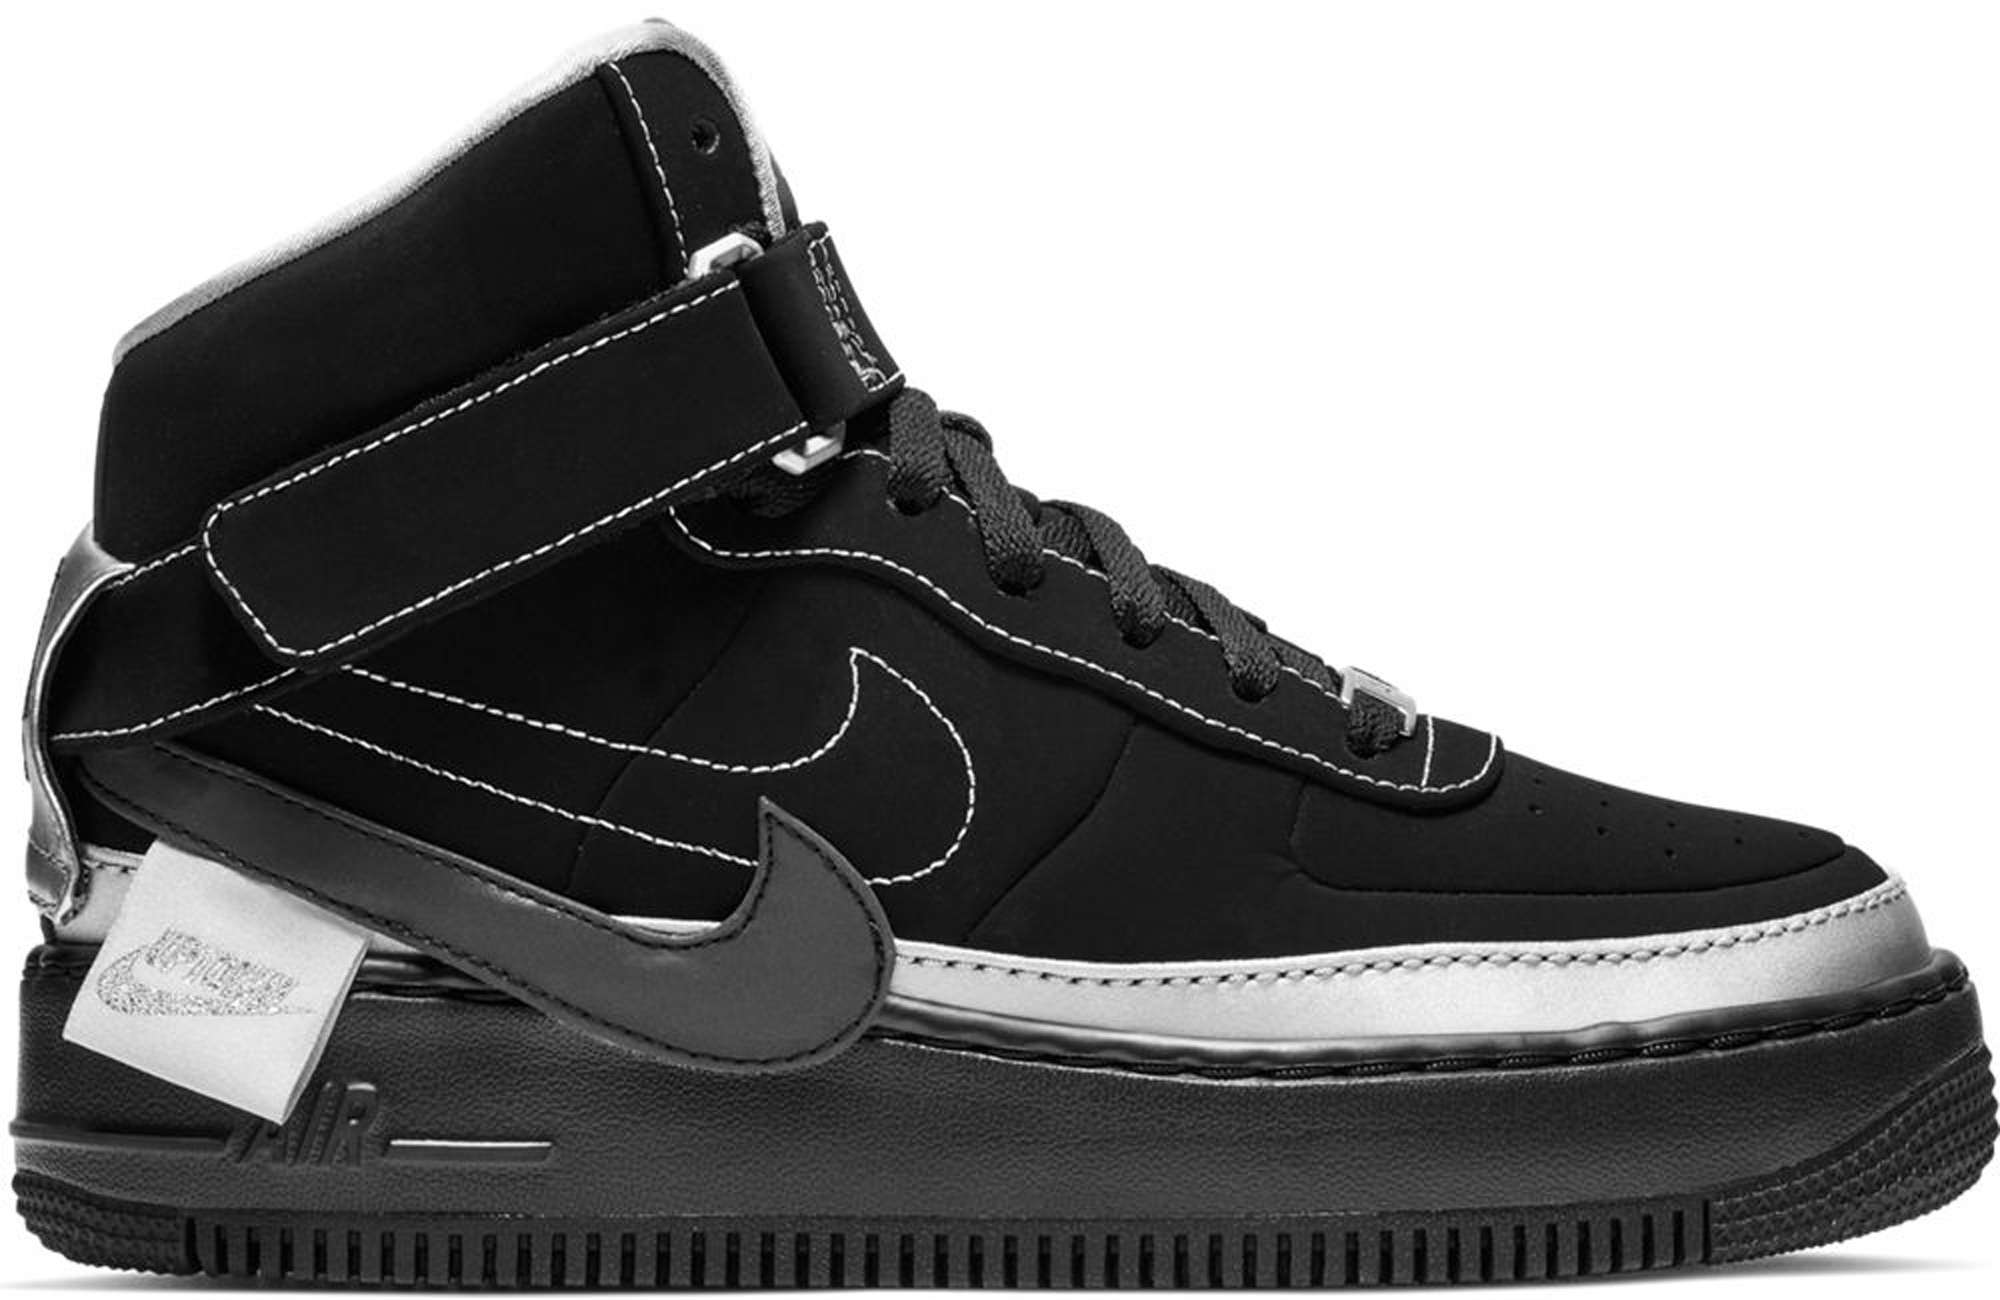 nike air force 1 jester xx high